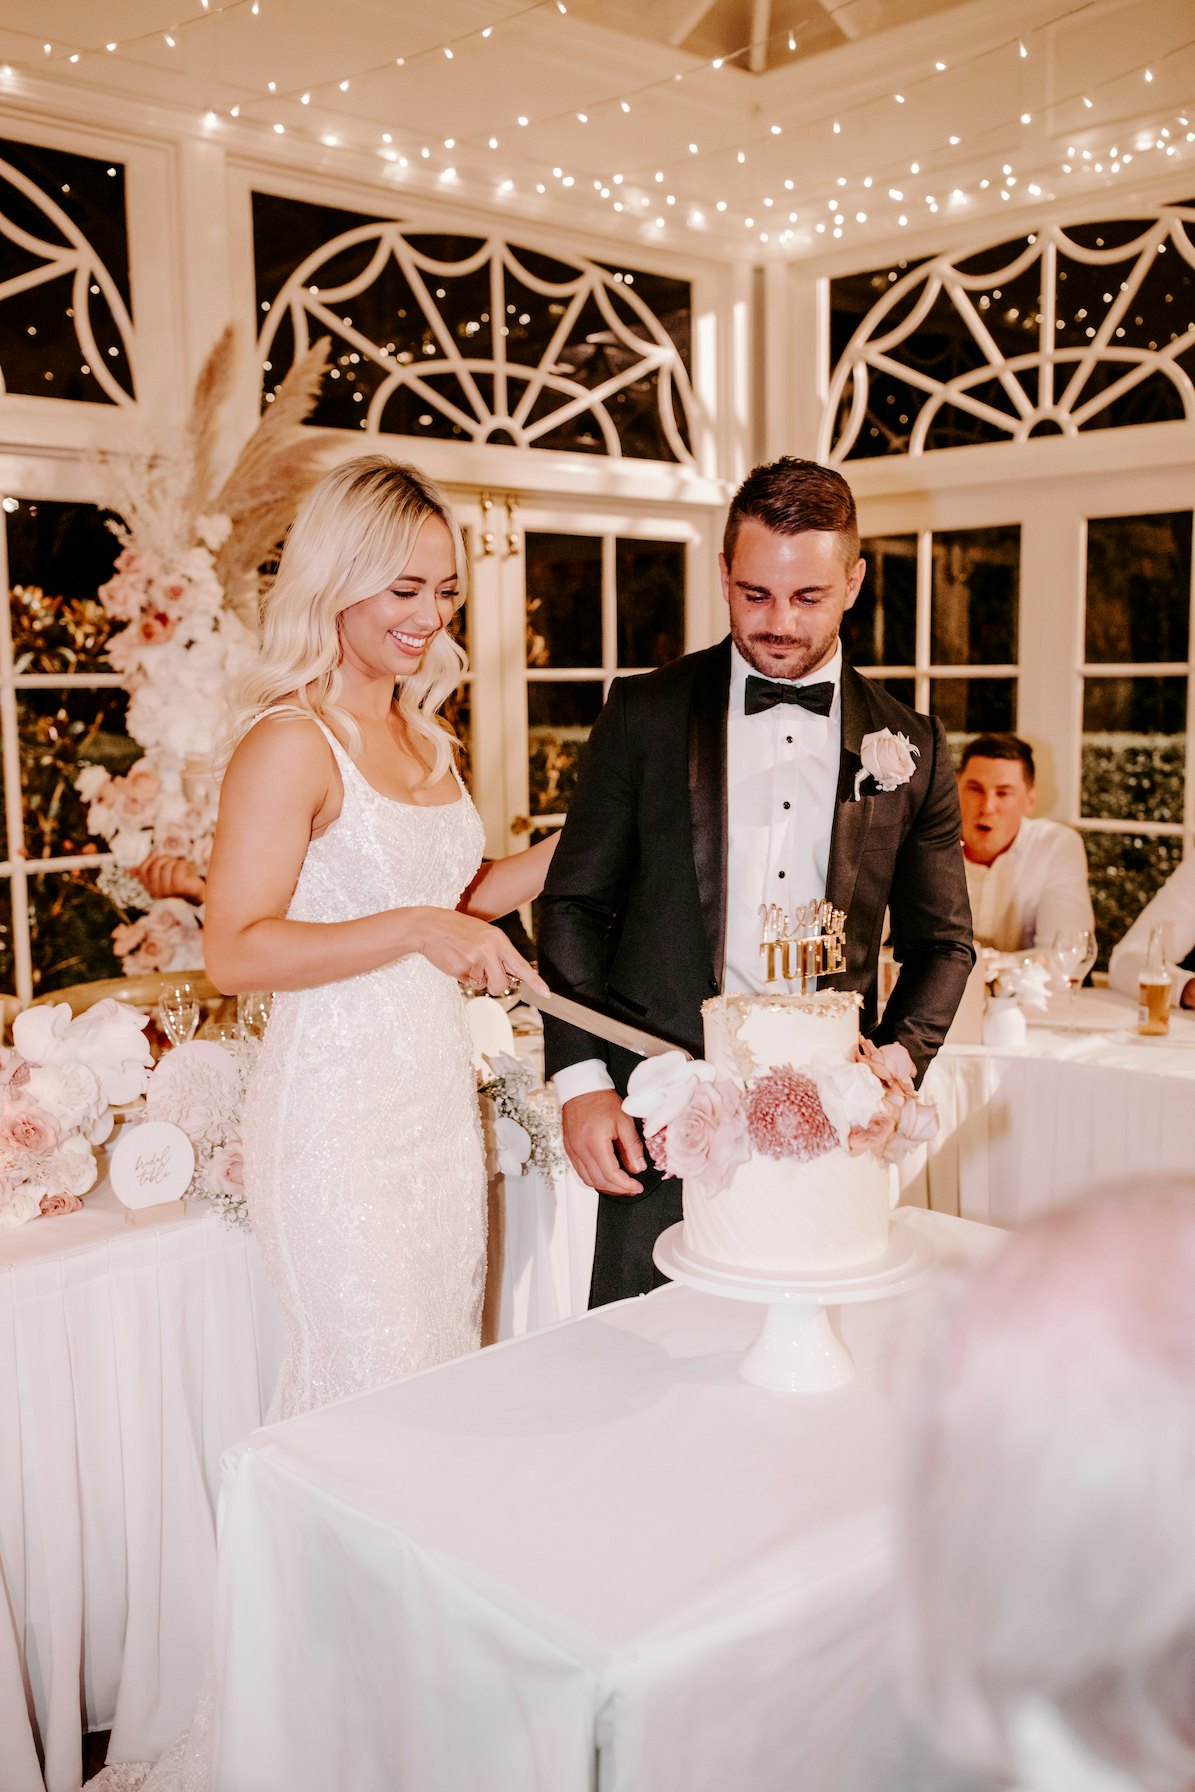 Bride and groom cutting cake 